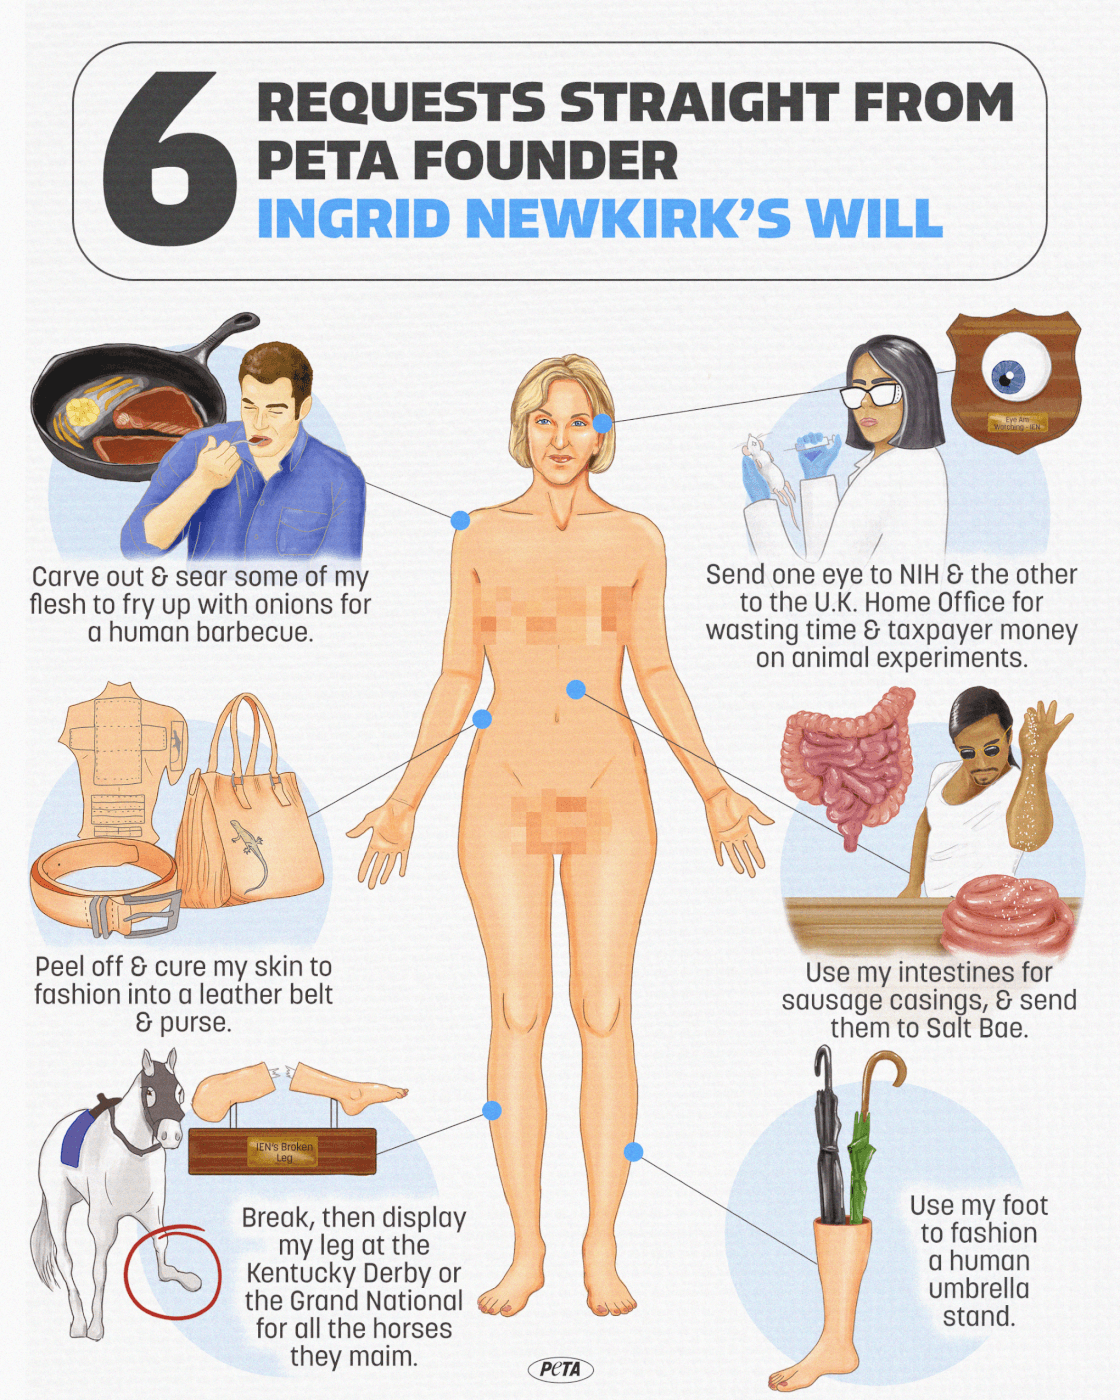 Six requests straight from PETA founder Ingird Newkirk's will